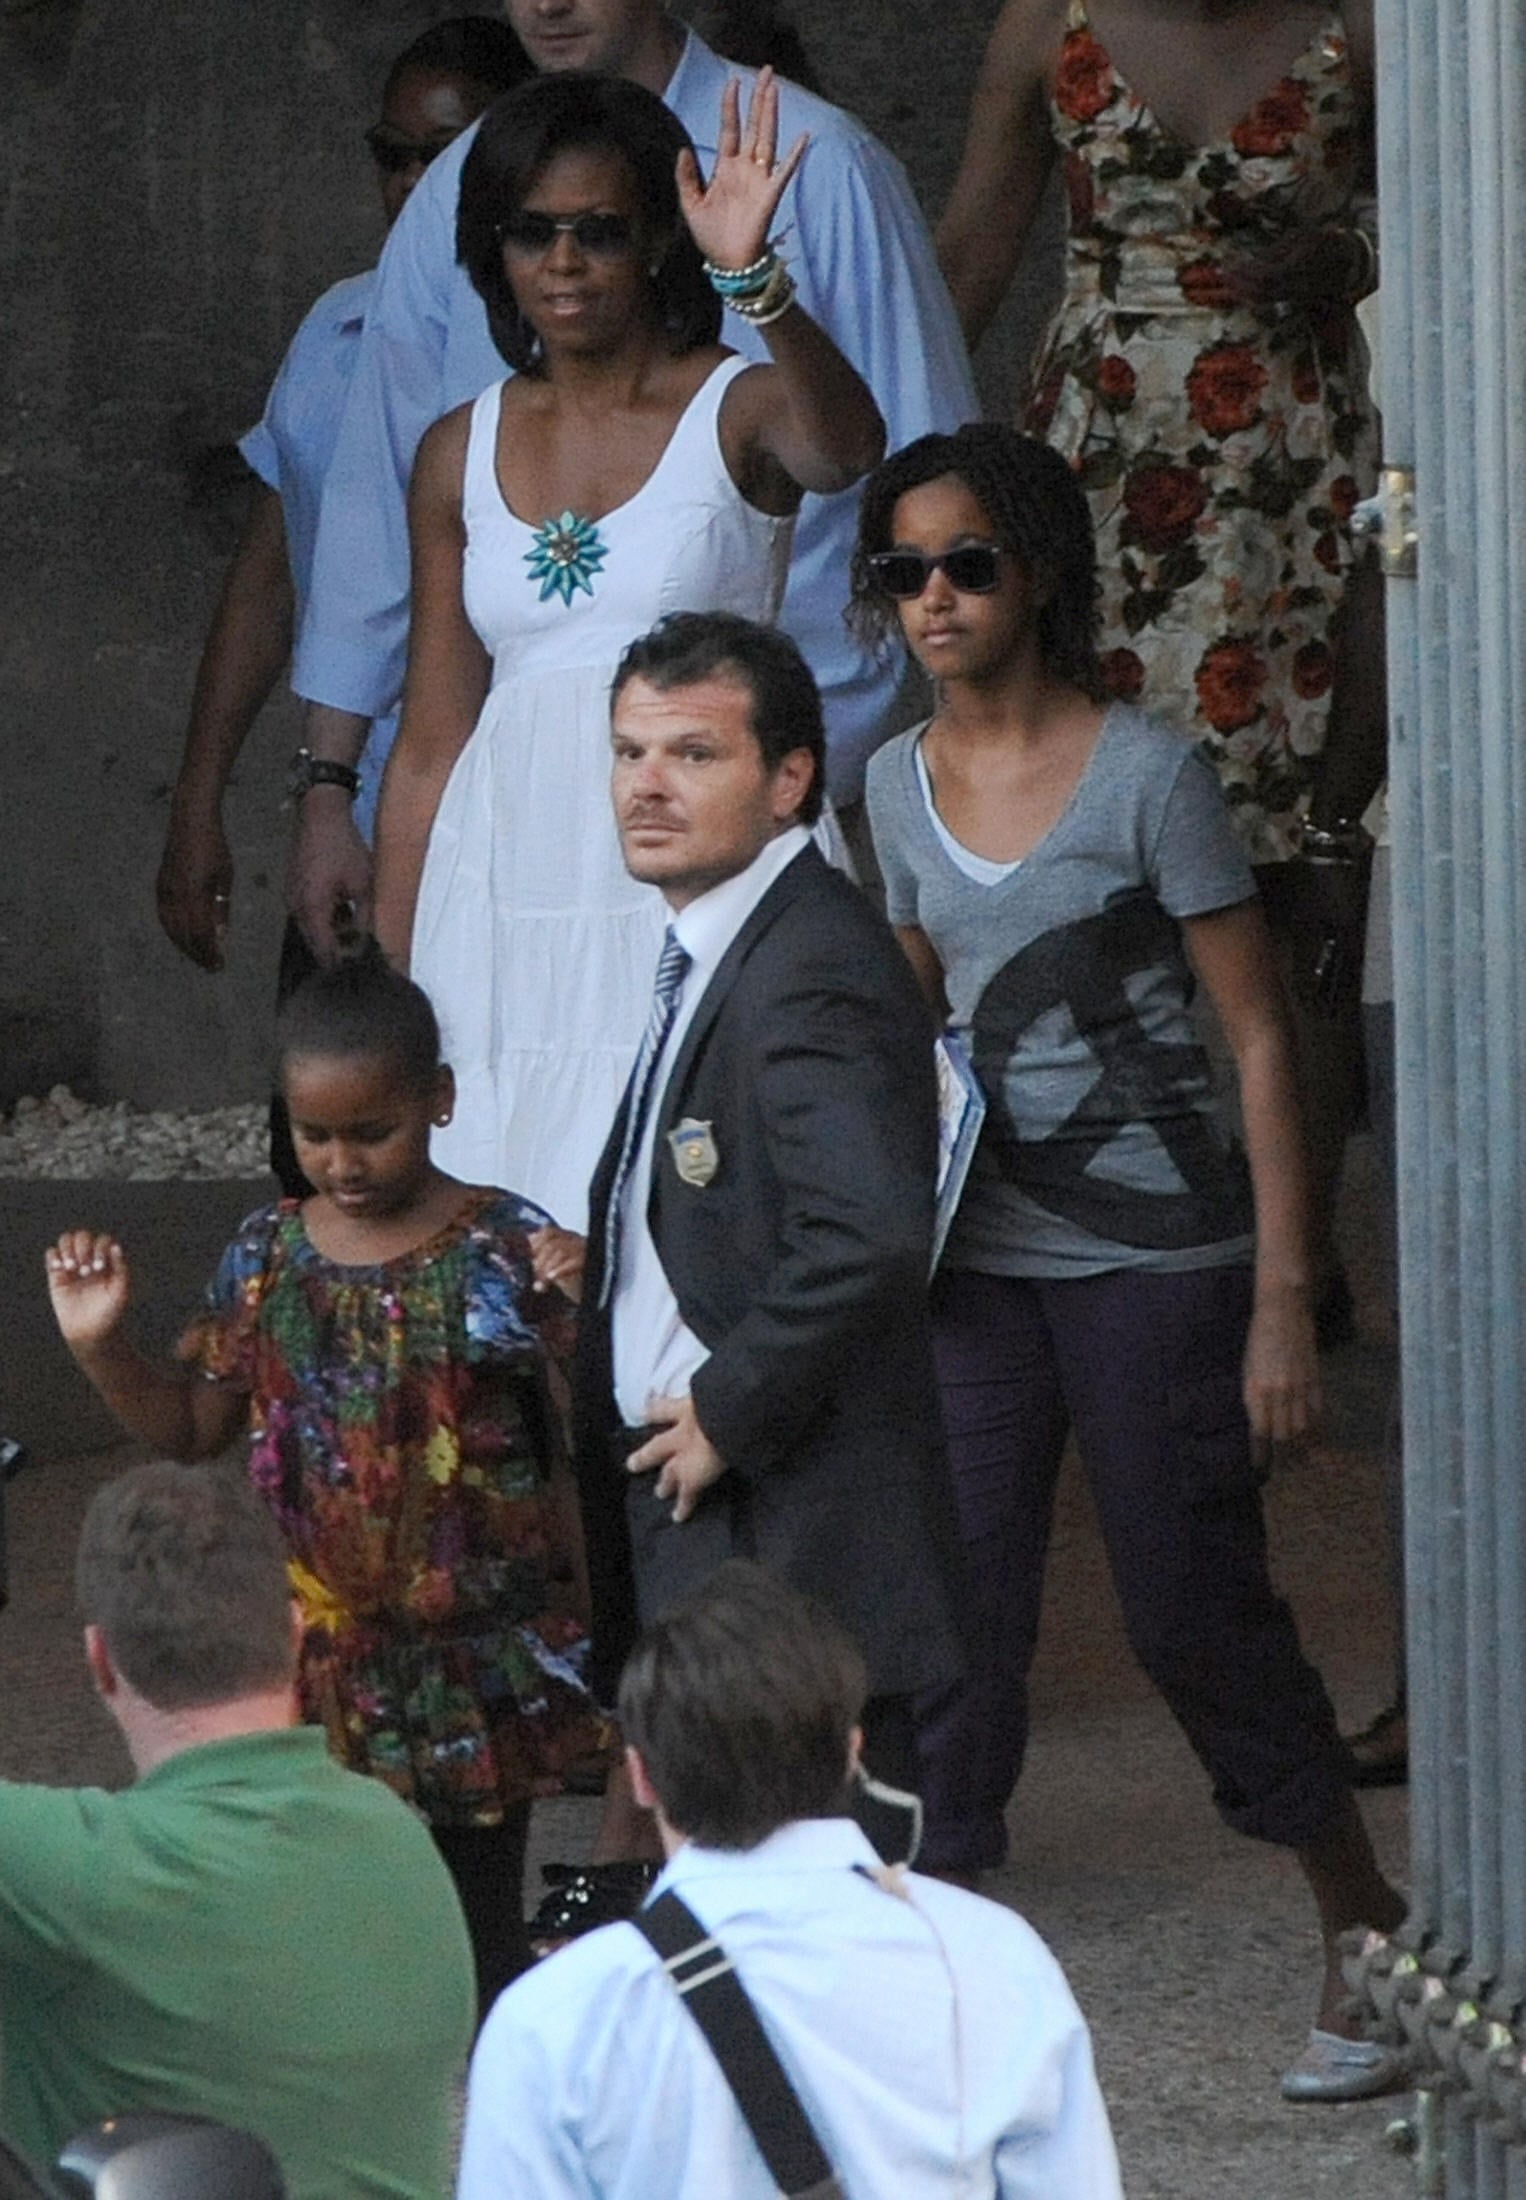 During a July 2009 trip to Italy, the first lady waved to a crowd after touring the Colosseum with Sasha and Malia. 